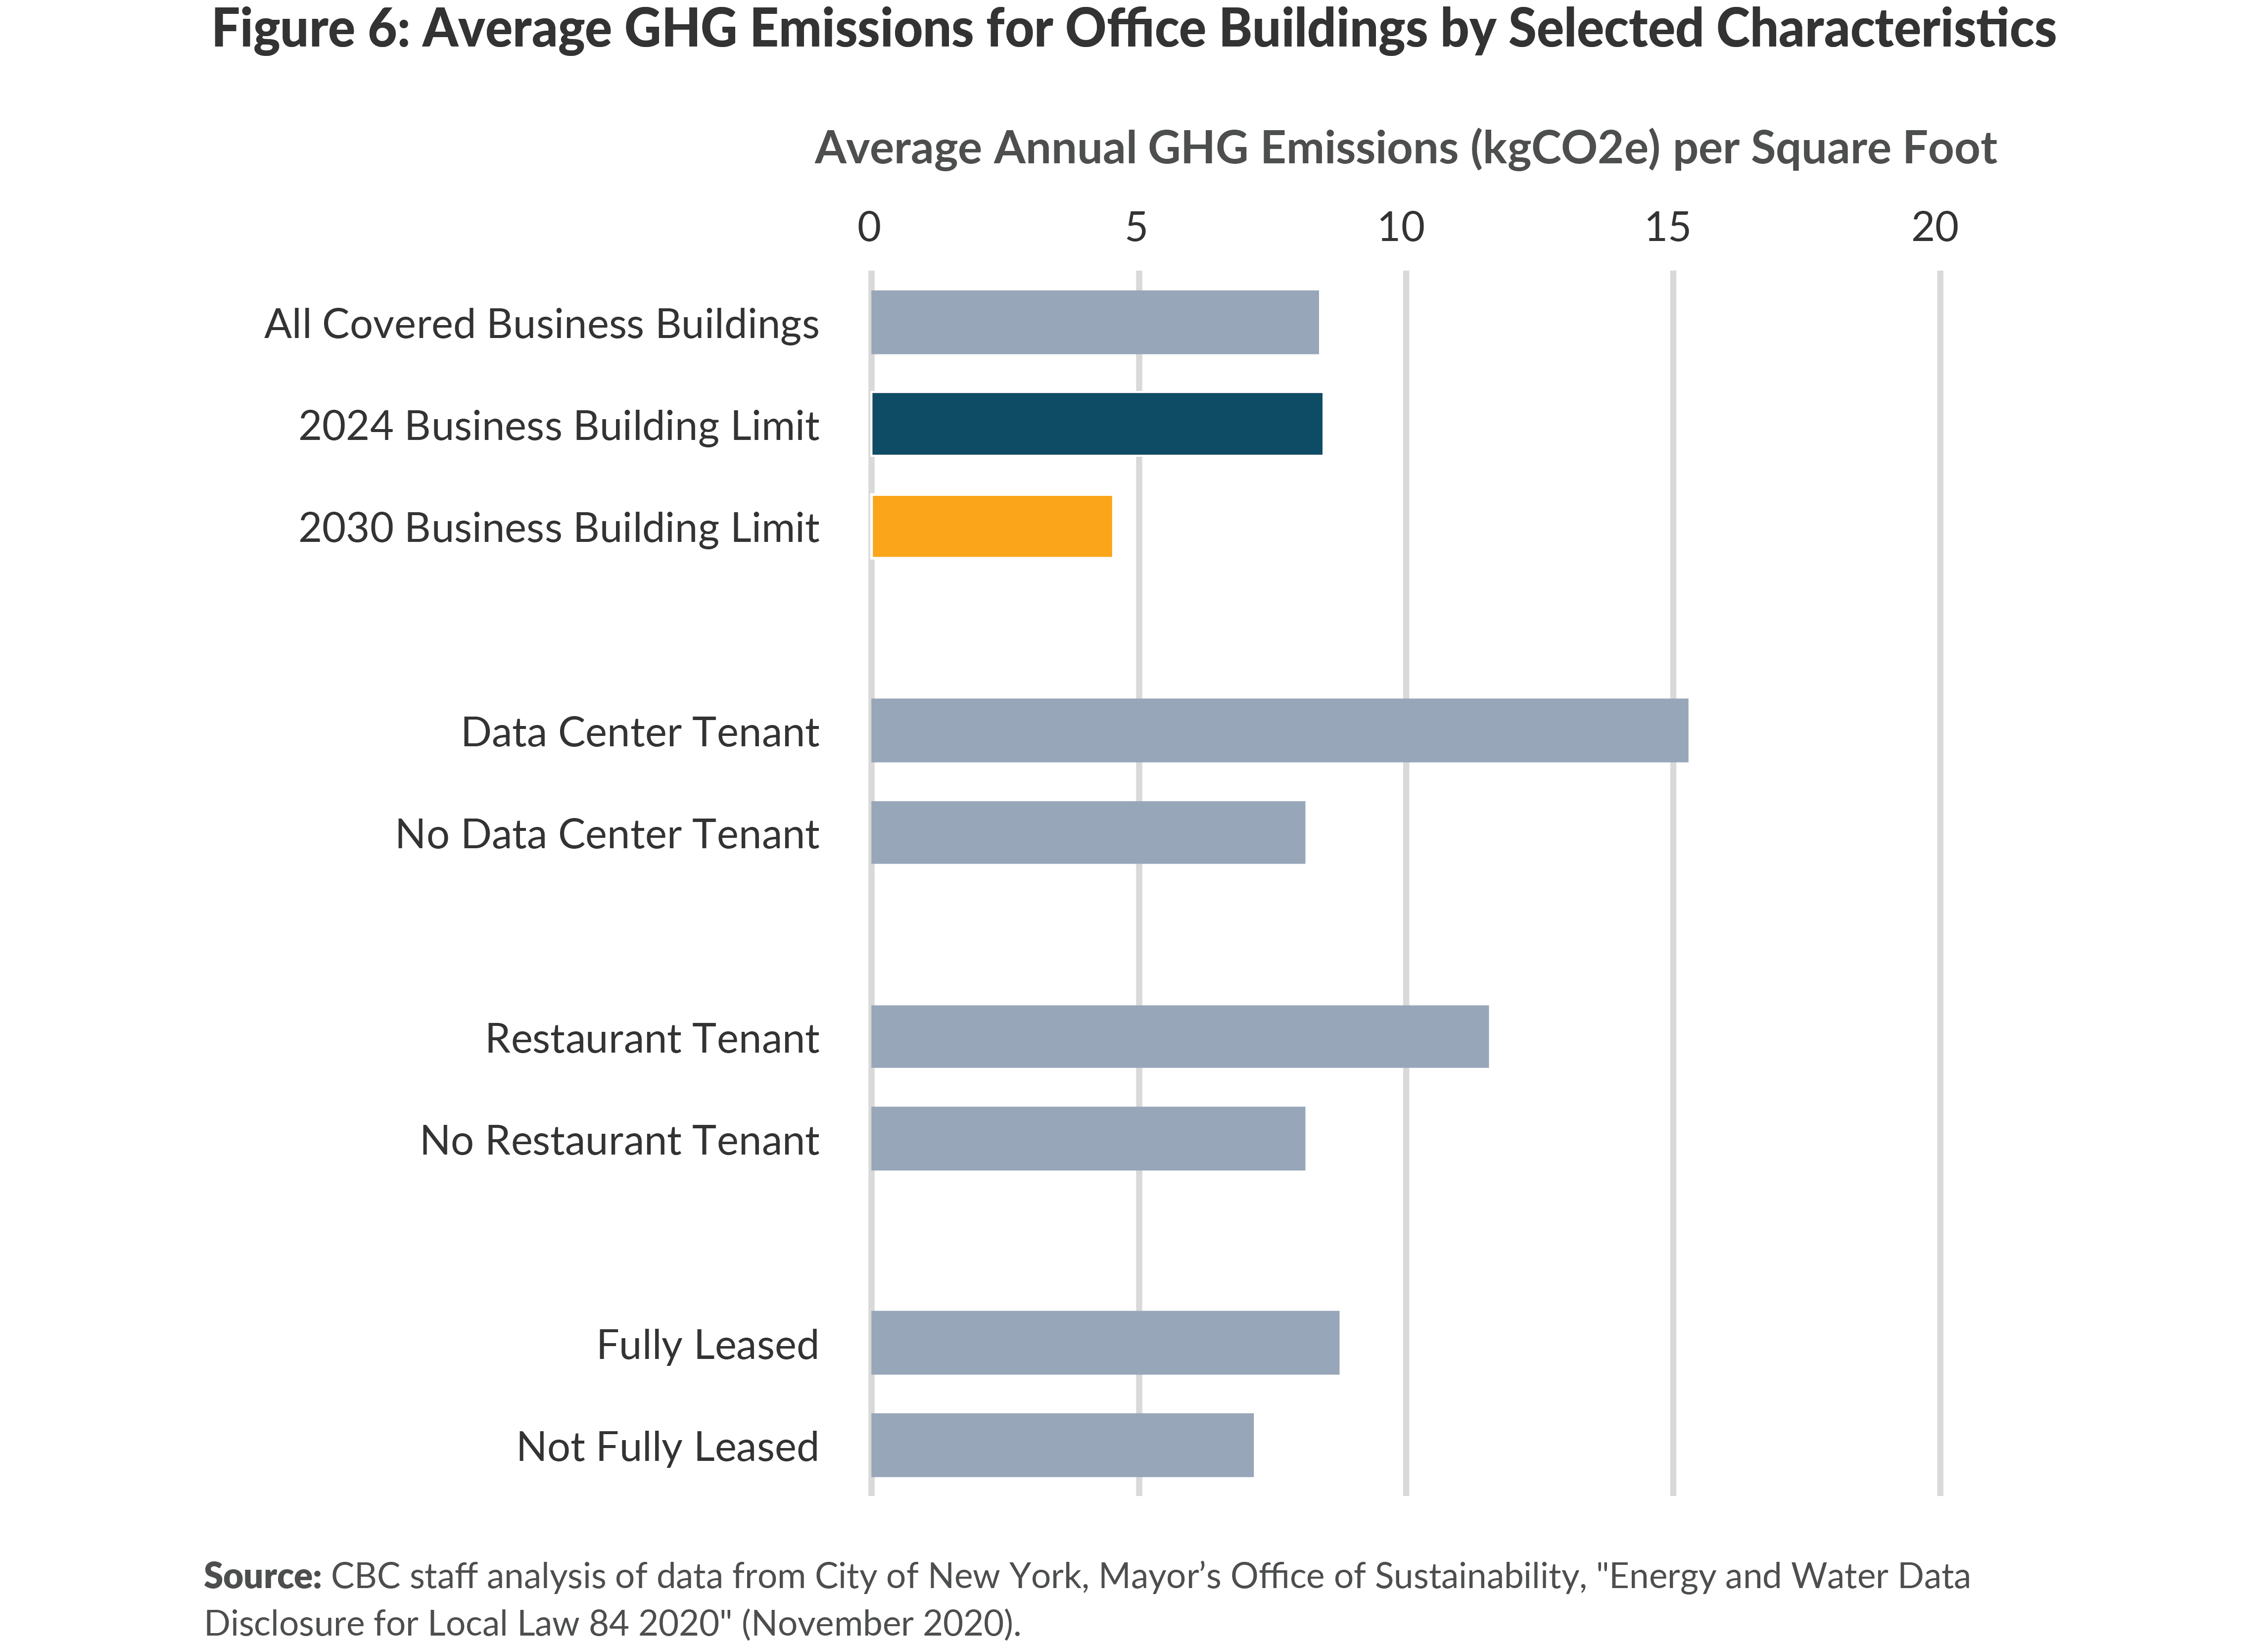 Figure 6. Average GHG emissions for office buildings by selected characteristics